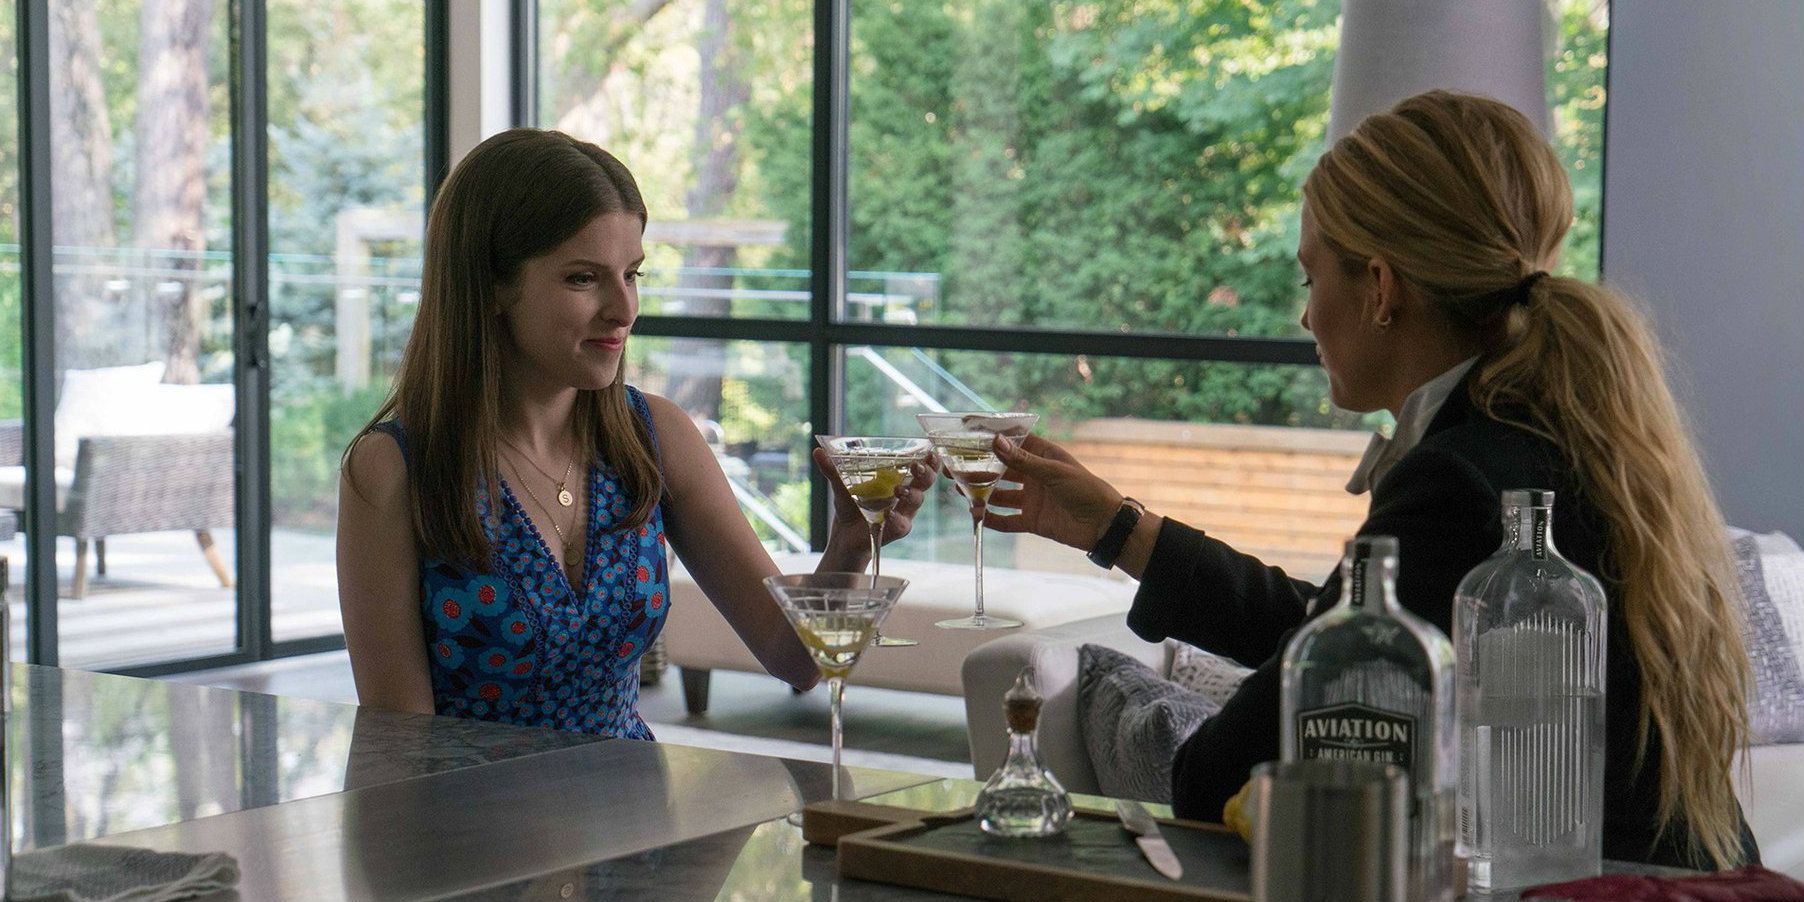 Anna Kendrick and Blake Lively toast martinis in A Simple Favor